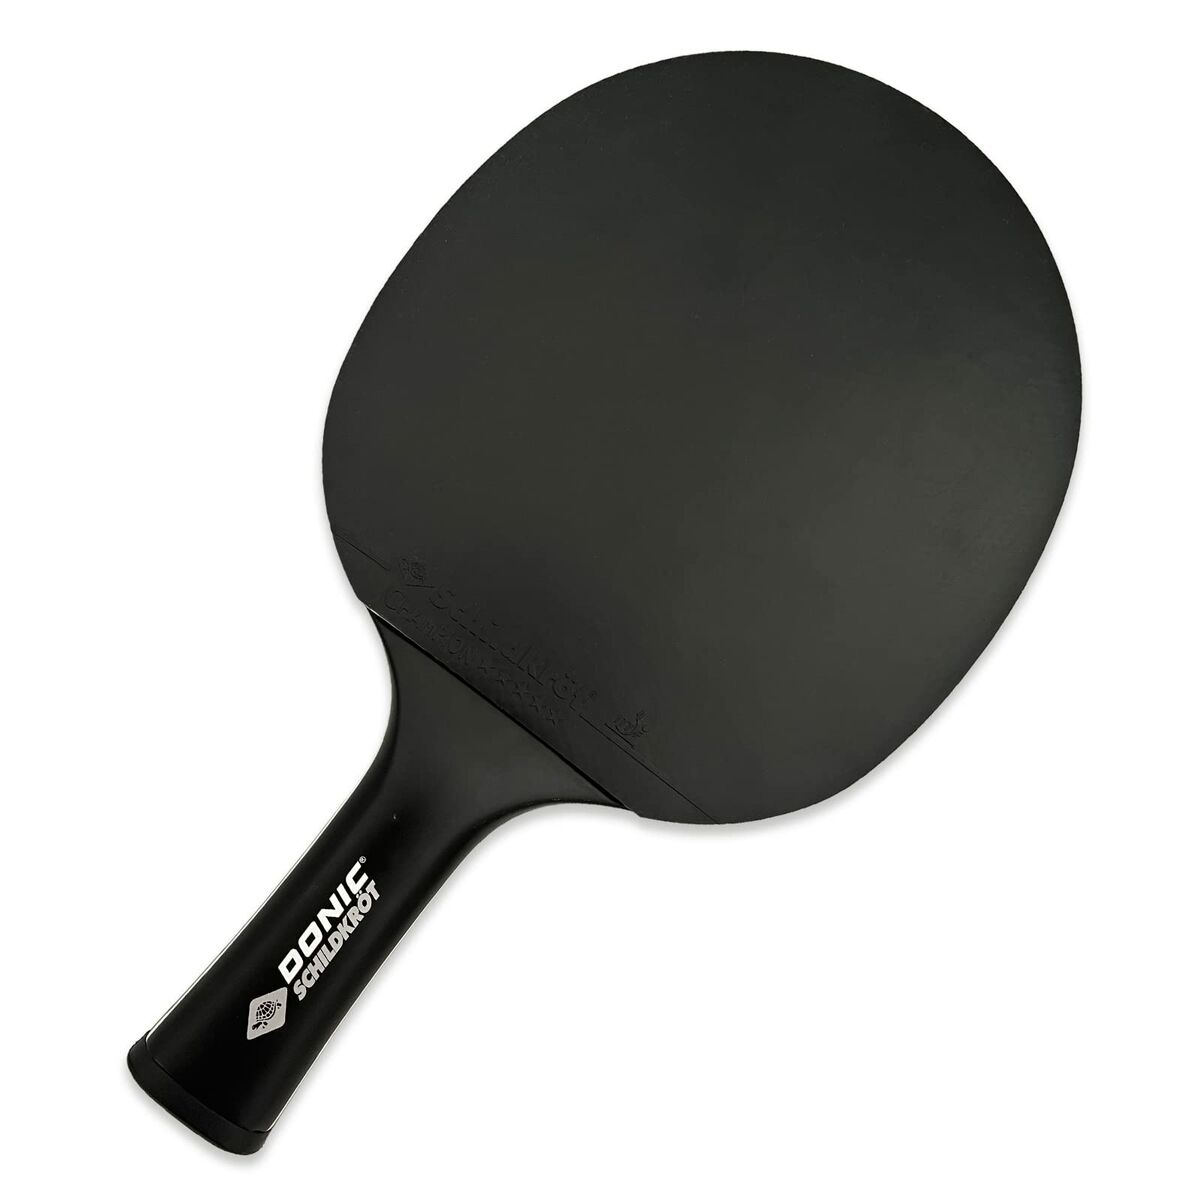 Ping Pong Racket Donic CarboTec 900